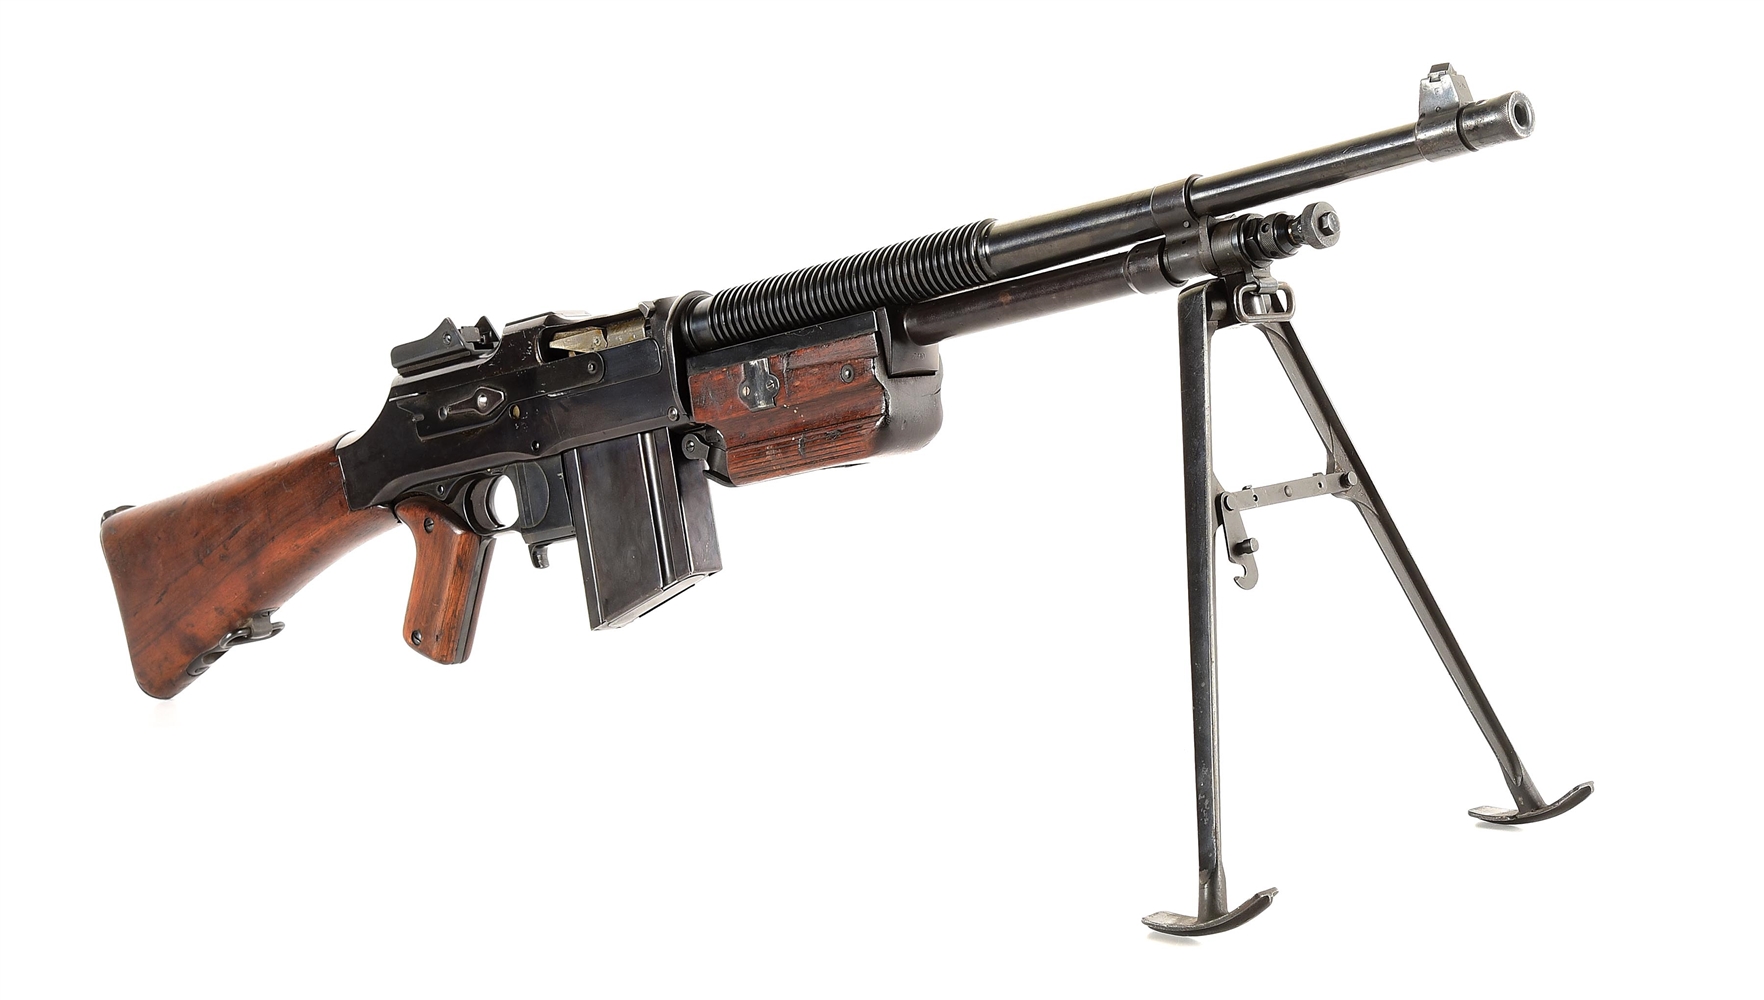 (N) FABULOUS AND INCREDIBLY RARE AMNESTY REGISTERED FULLY TRANSFERABLE ORIGINAL BELGIAN FM 30 (PRE-CURSOR TO THE FN-D) MACHINE GUN IN .30-06 (CURIO AND RELIC).